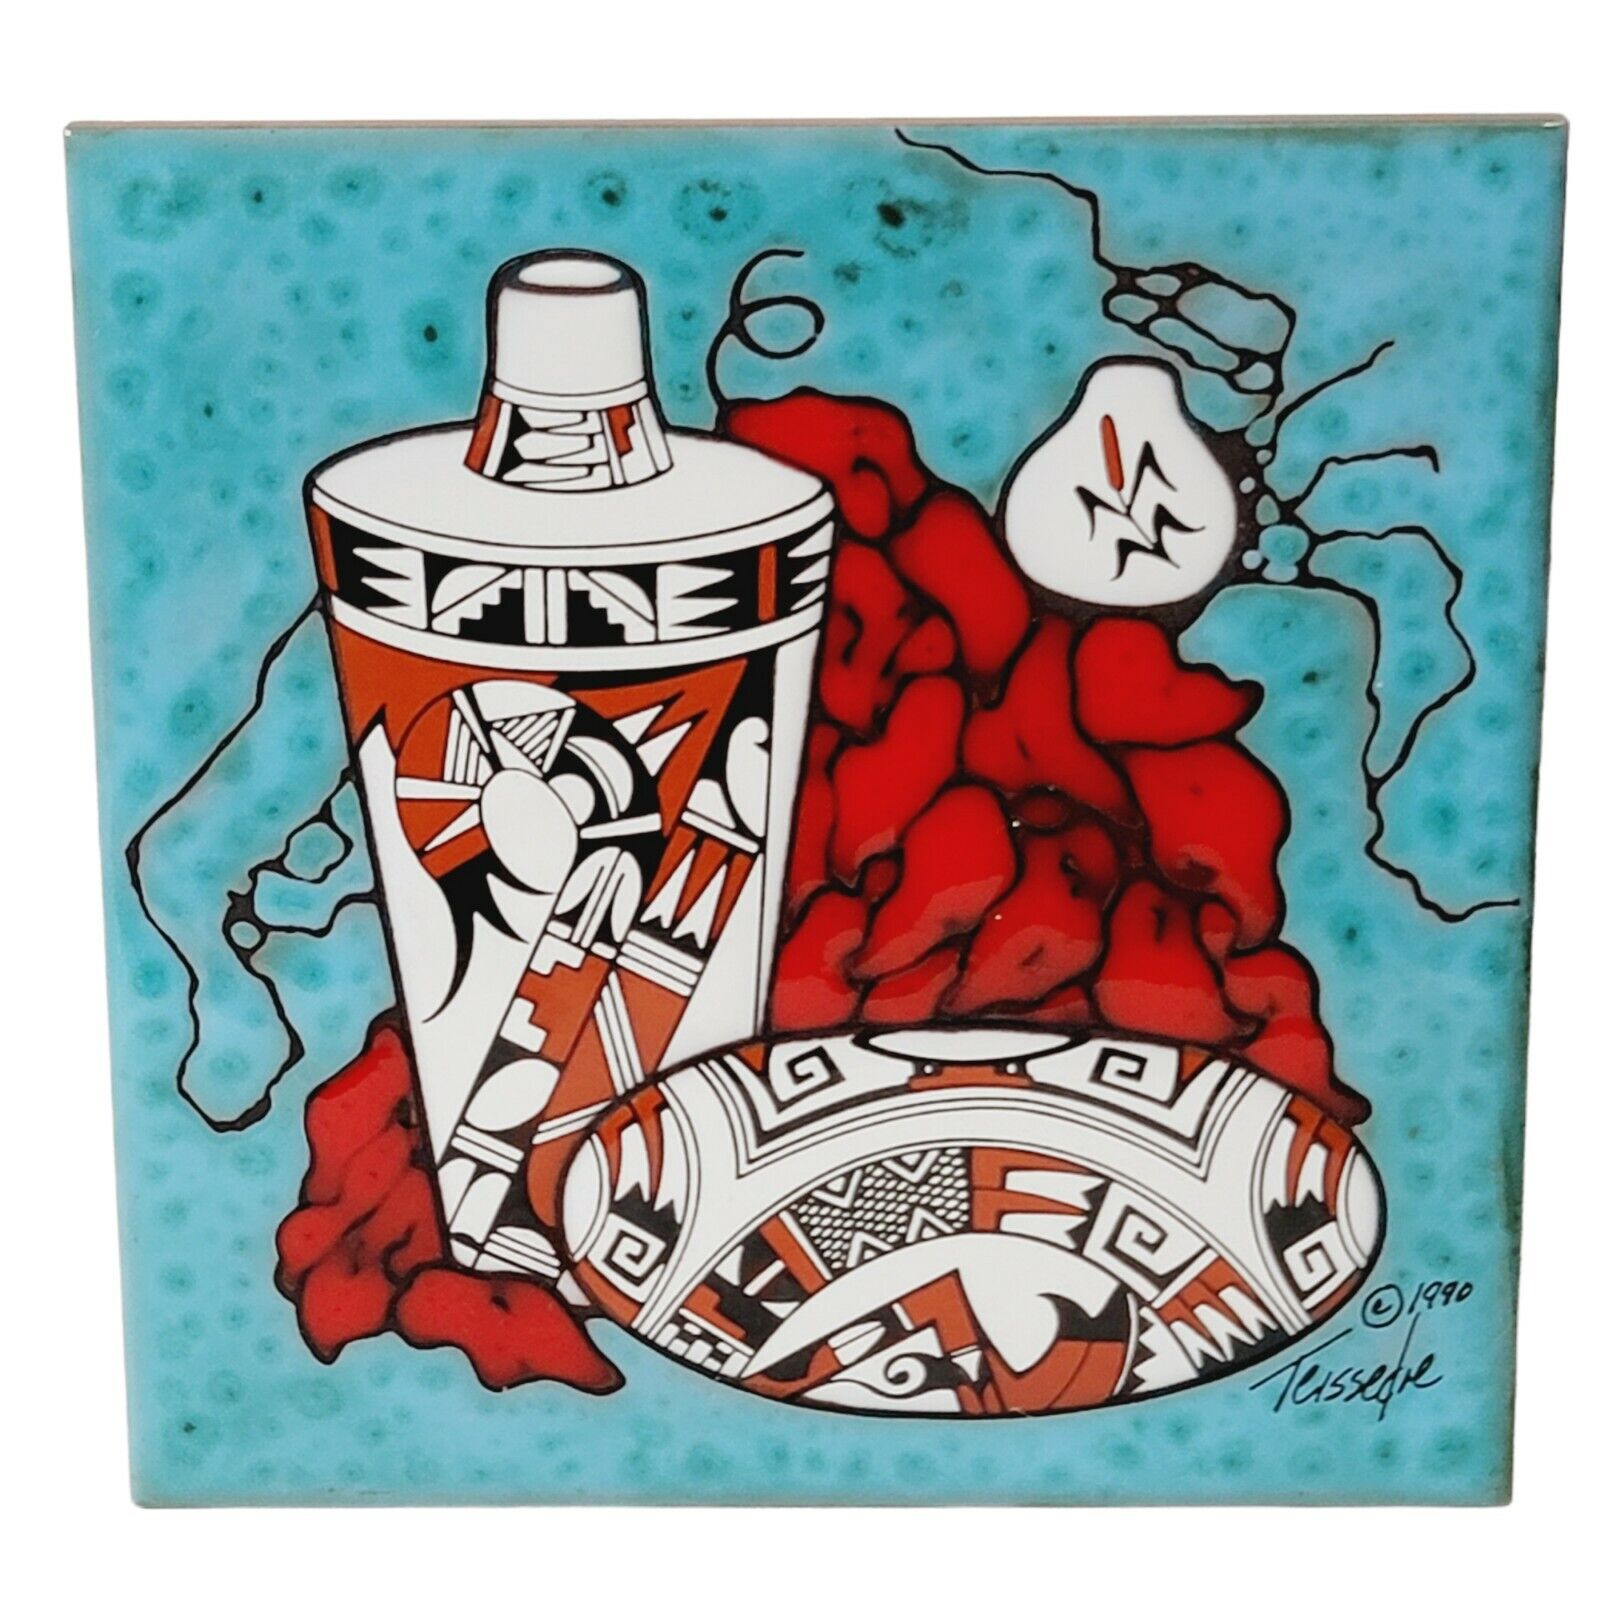 2 Cleo Teissedre Southwest Teal Red Hand Painted Art Tile Trivet Coaster ‘83 ‘90 Cleo Teissedre - фотография #3